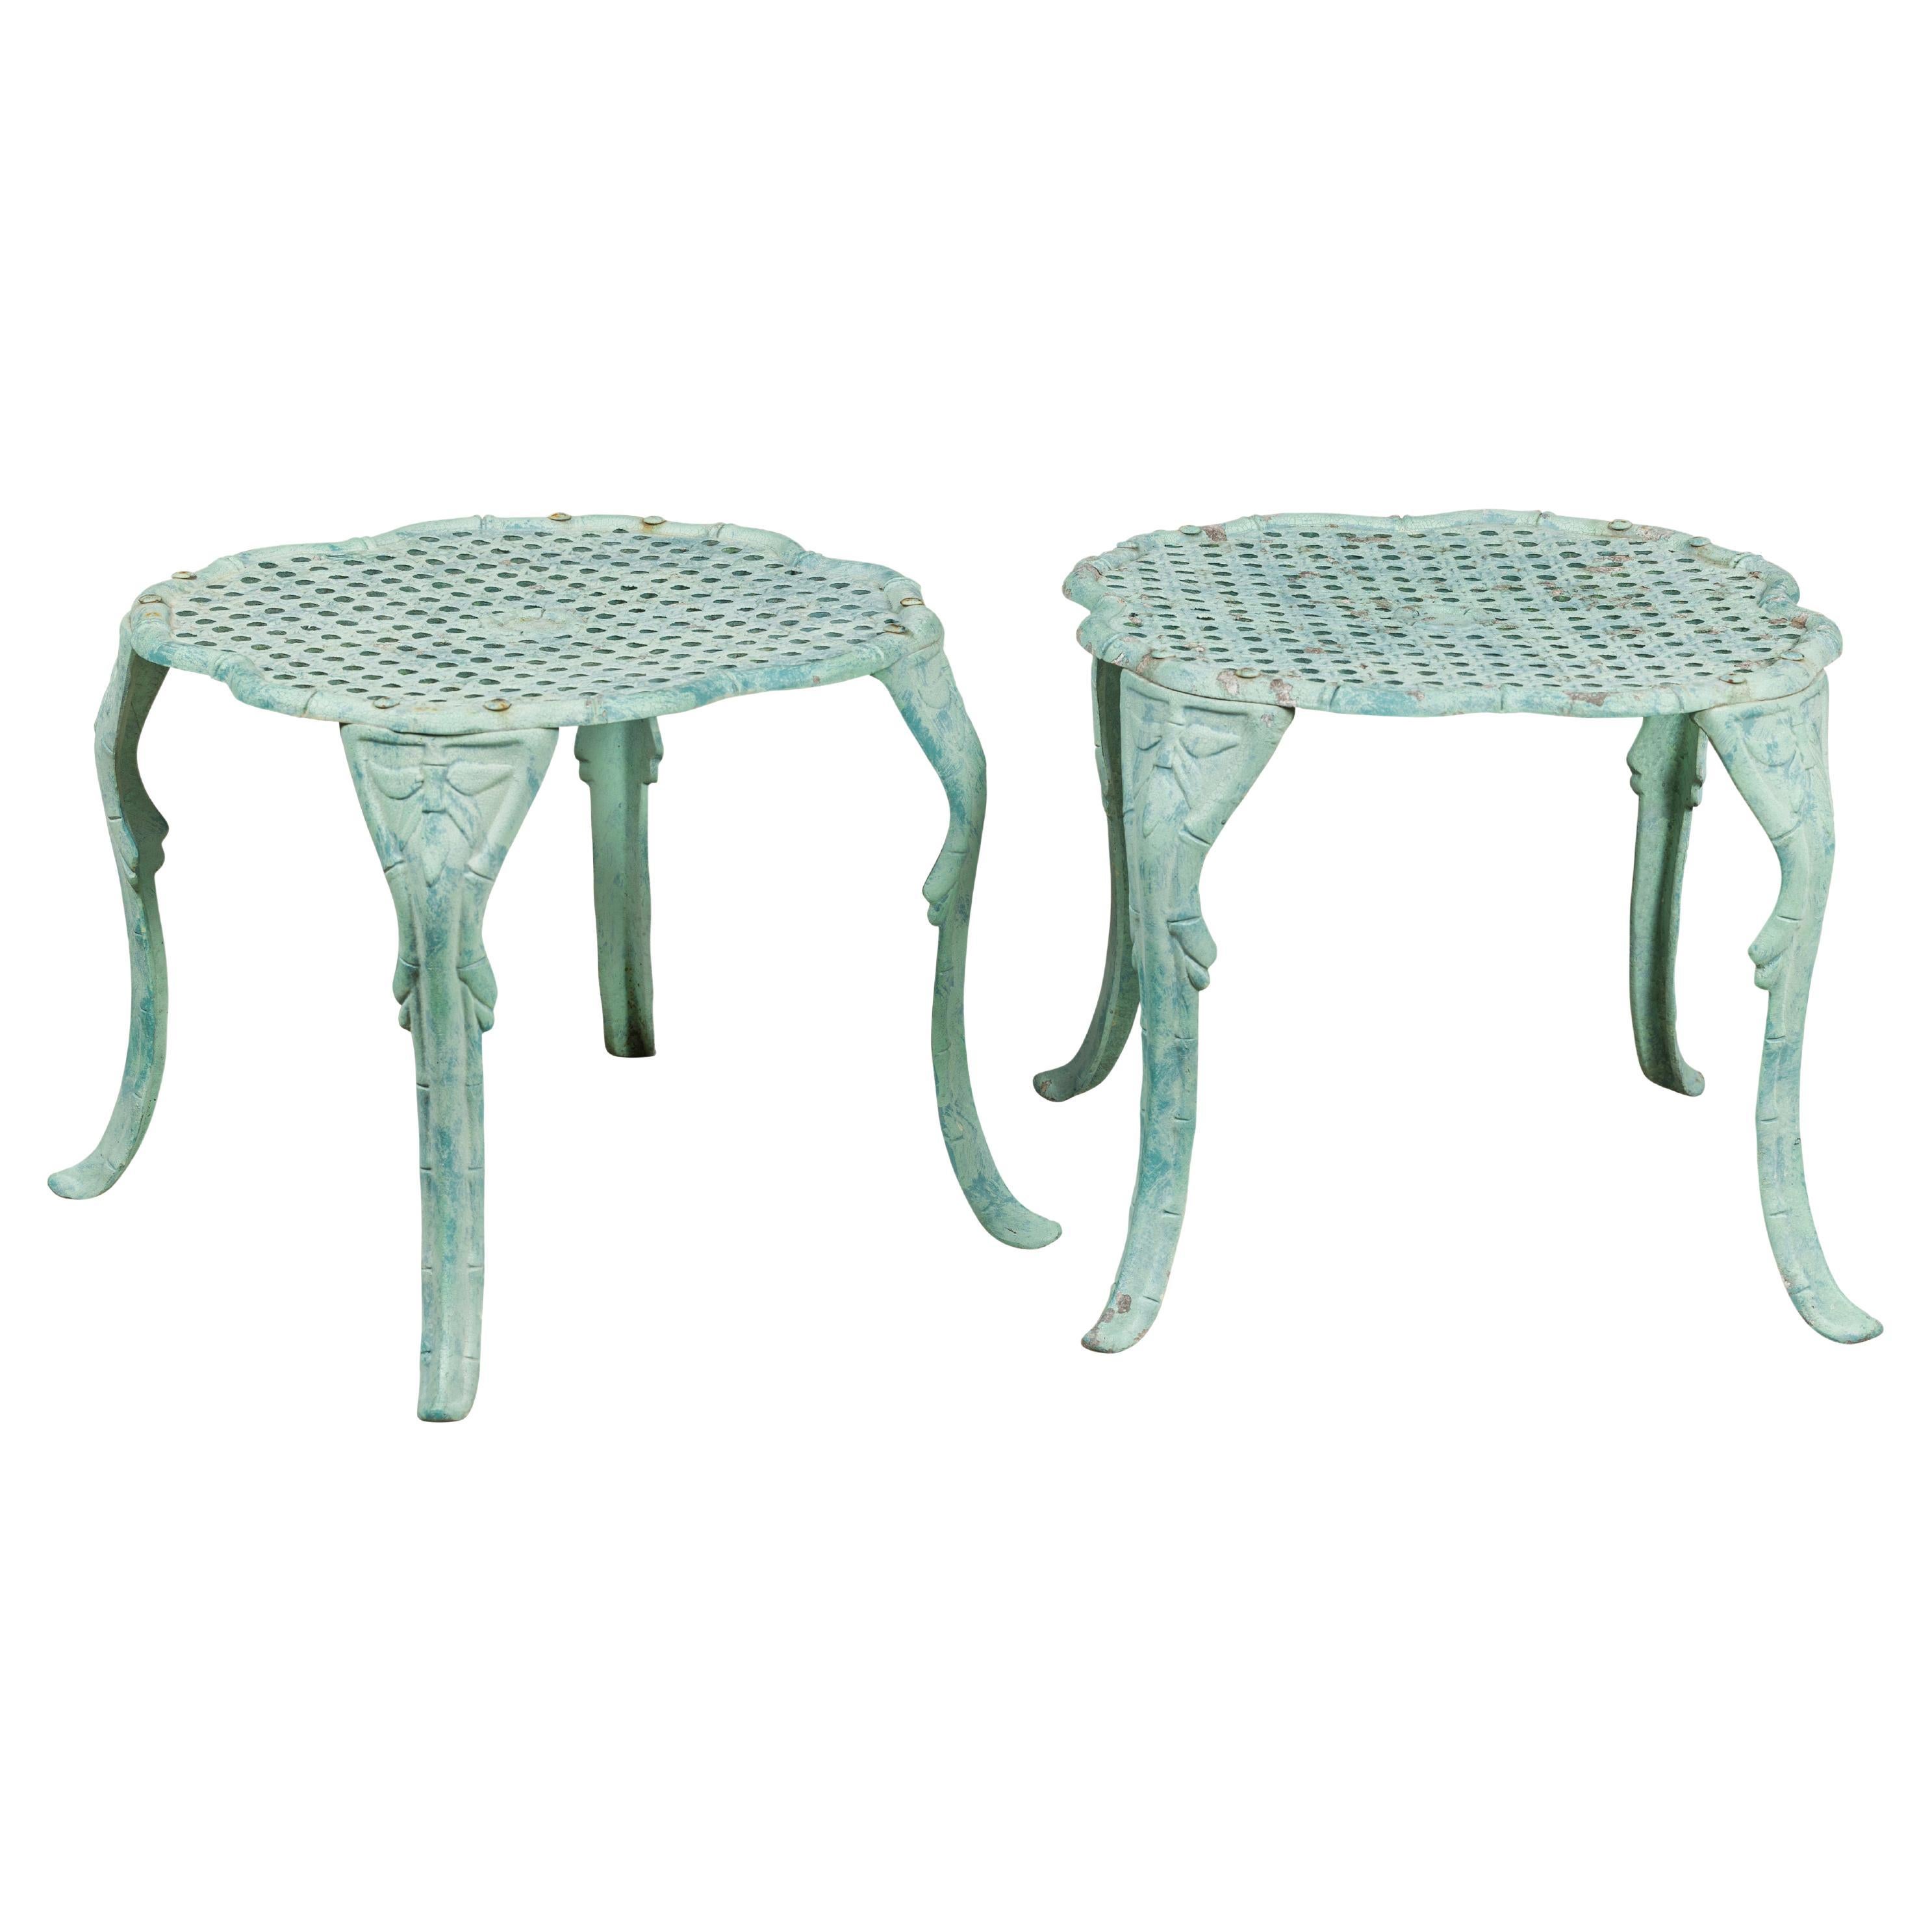 Midcentury Green Painted Cast Iron French Side Tables with Wicker Style Tops